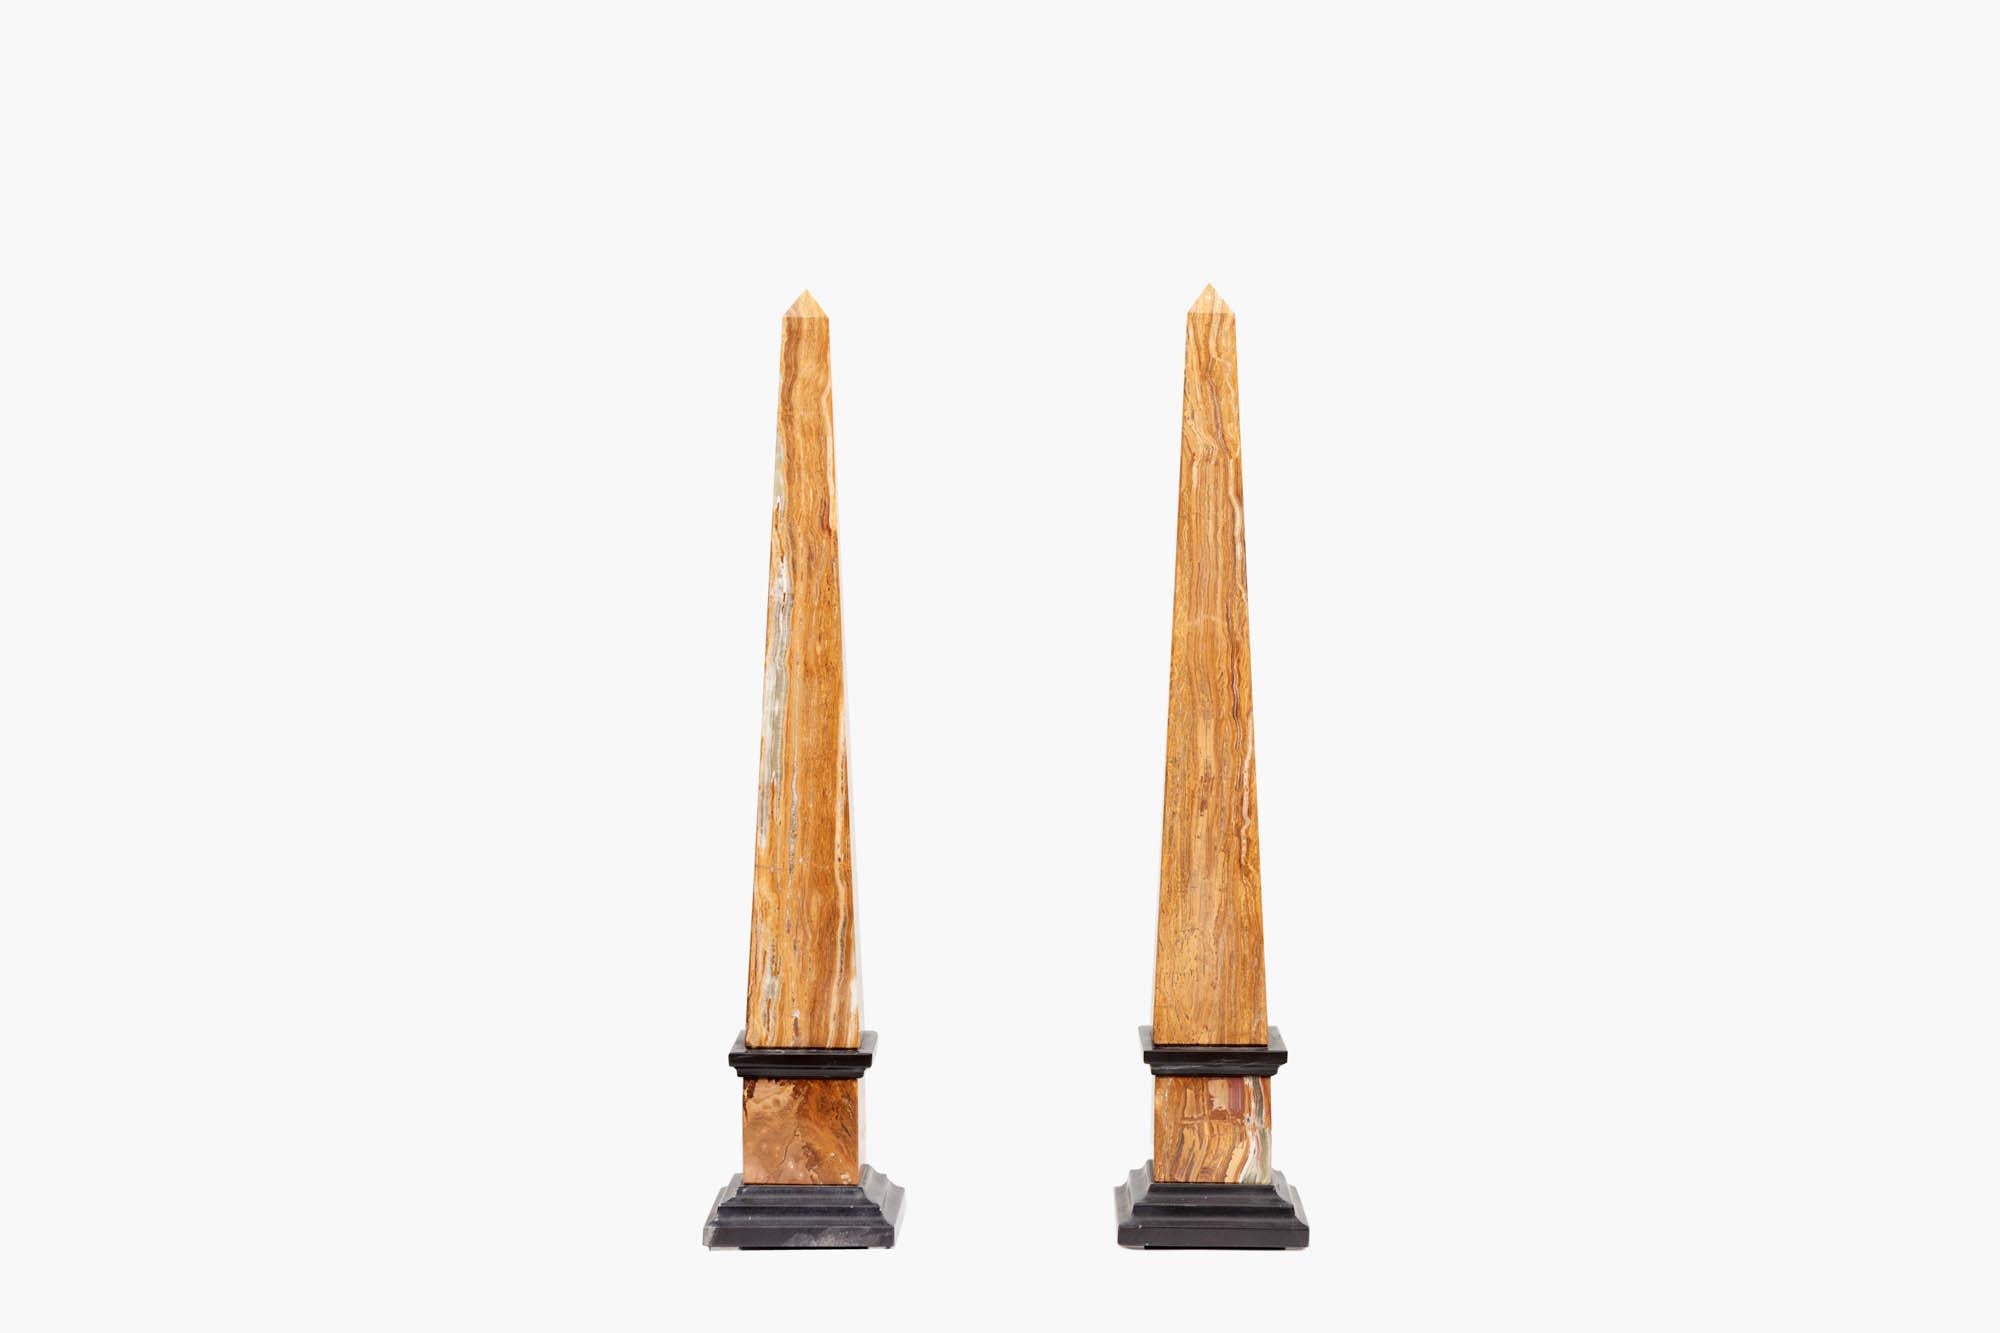 Pair of decorative Grand Tour Neoclassical-style obelisks dating from the late 19th/early 20th century. The tapering bodies are raised on square-stepped black marble bases and aprons that transition into contrasting rich yellow Italian marble